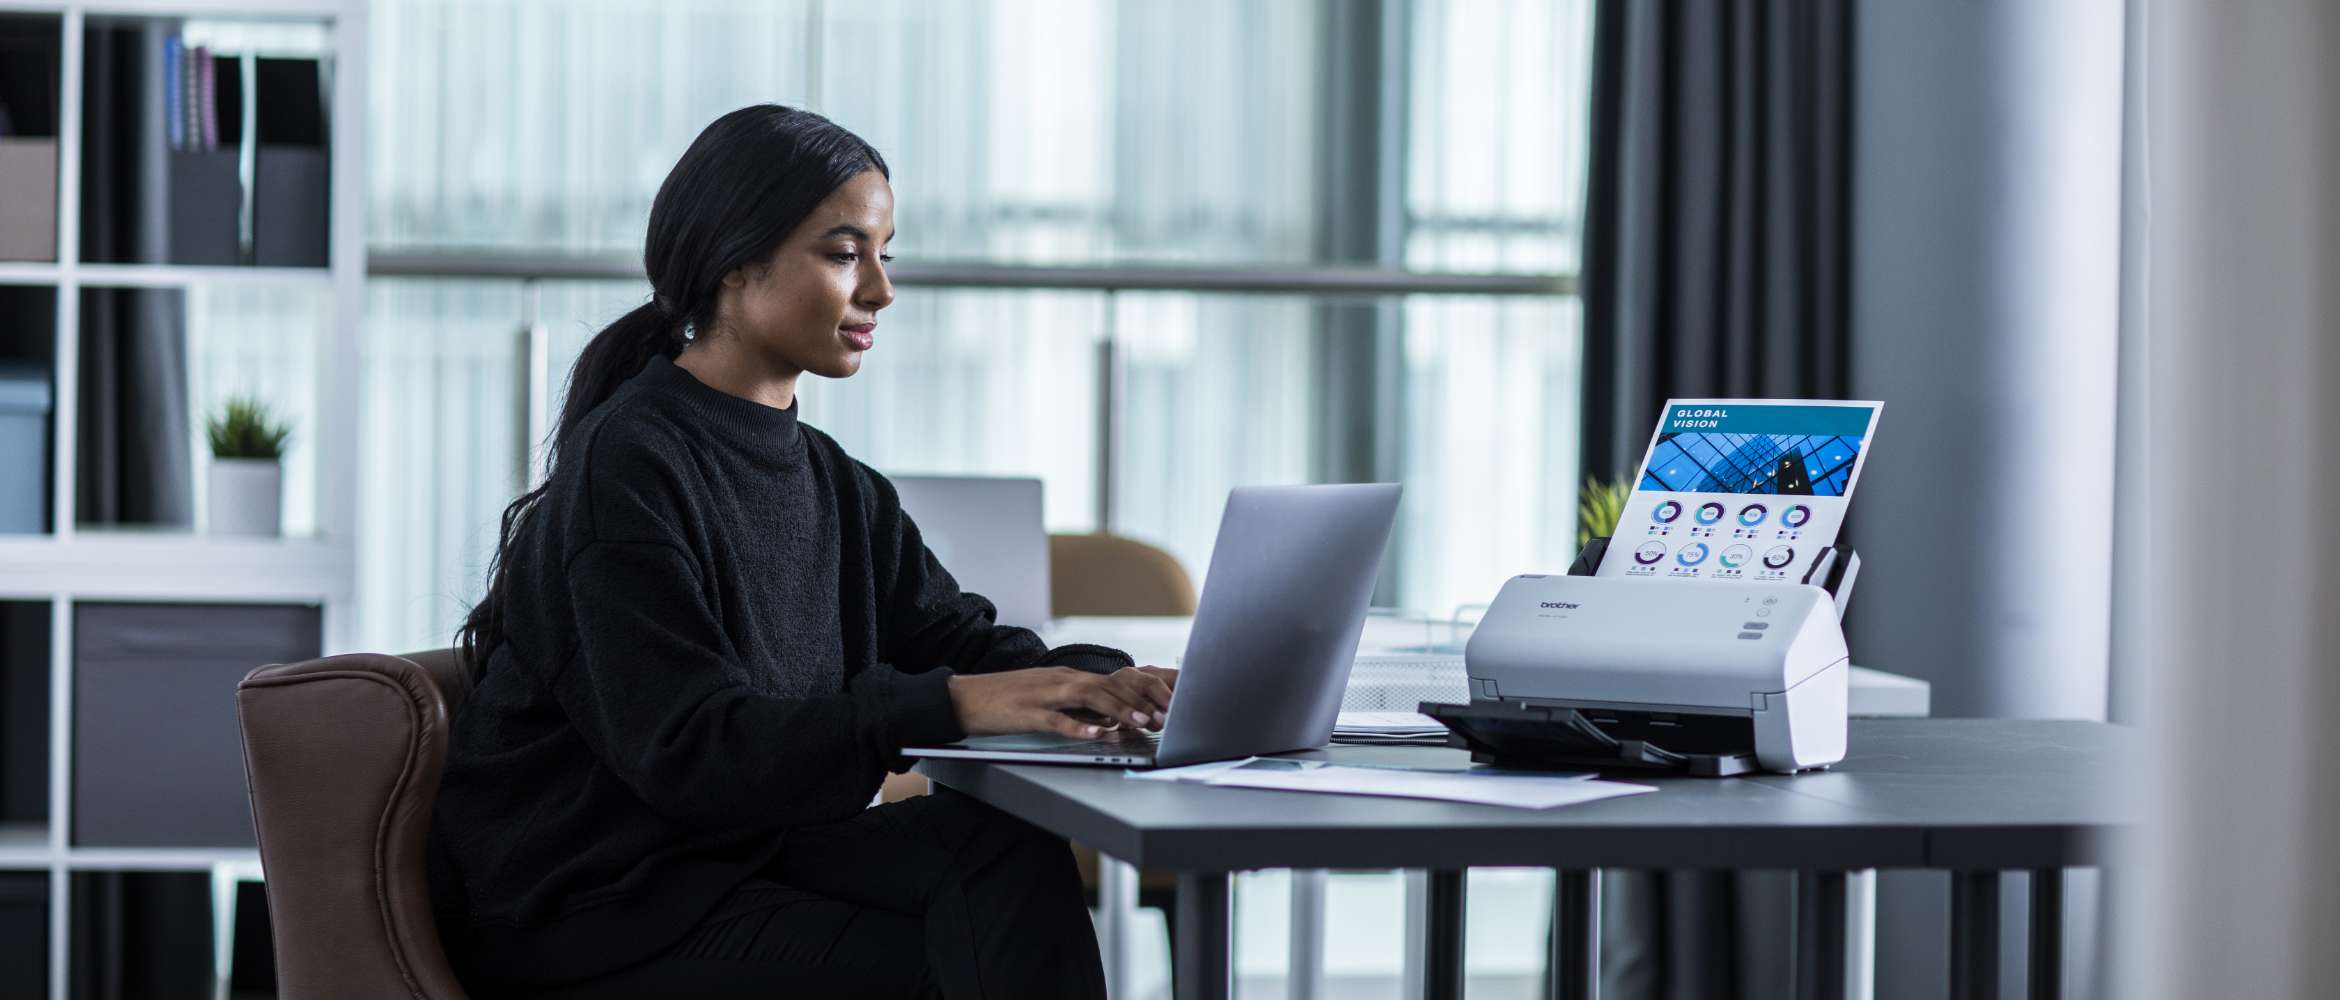 A female law employee sits at a desk working on her laptop with a Brother ADS document scanner by her side